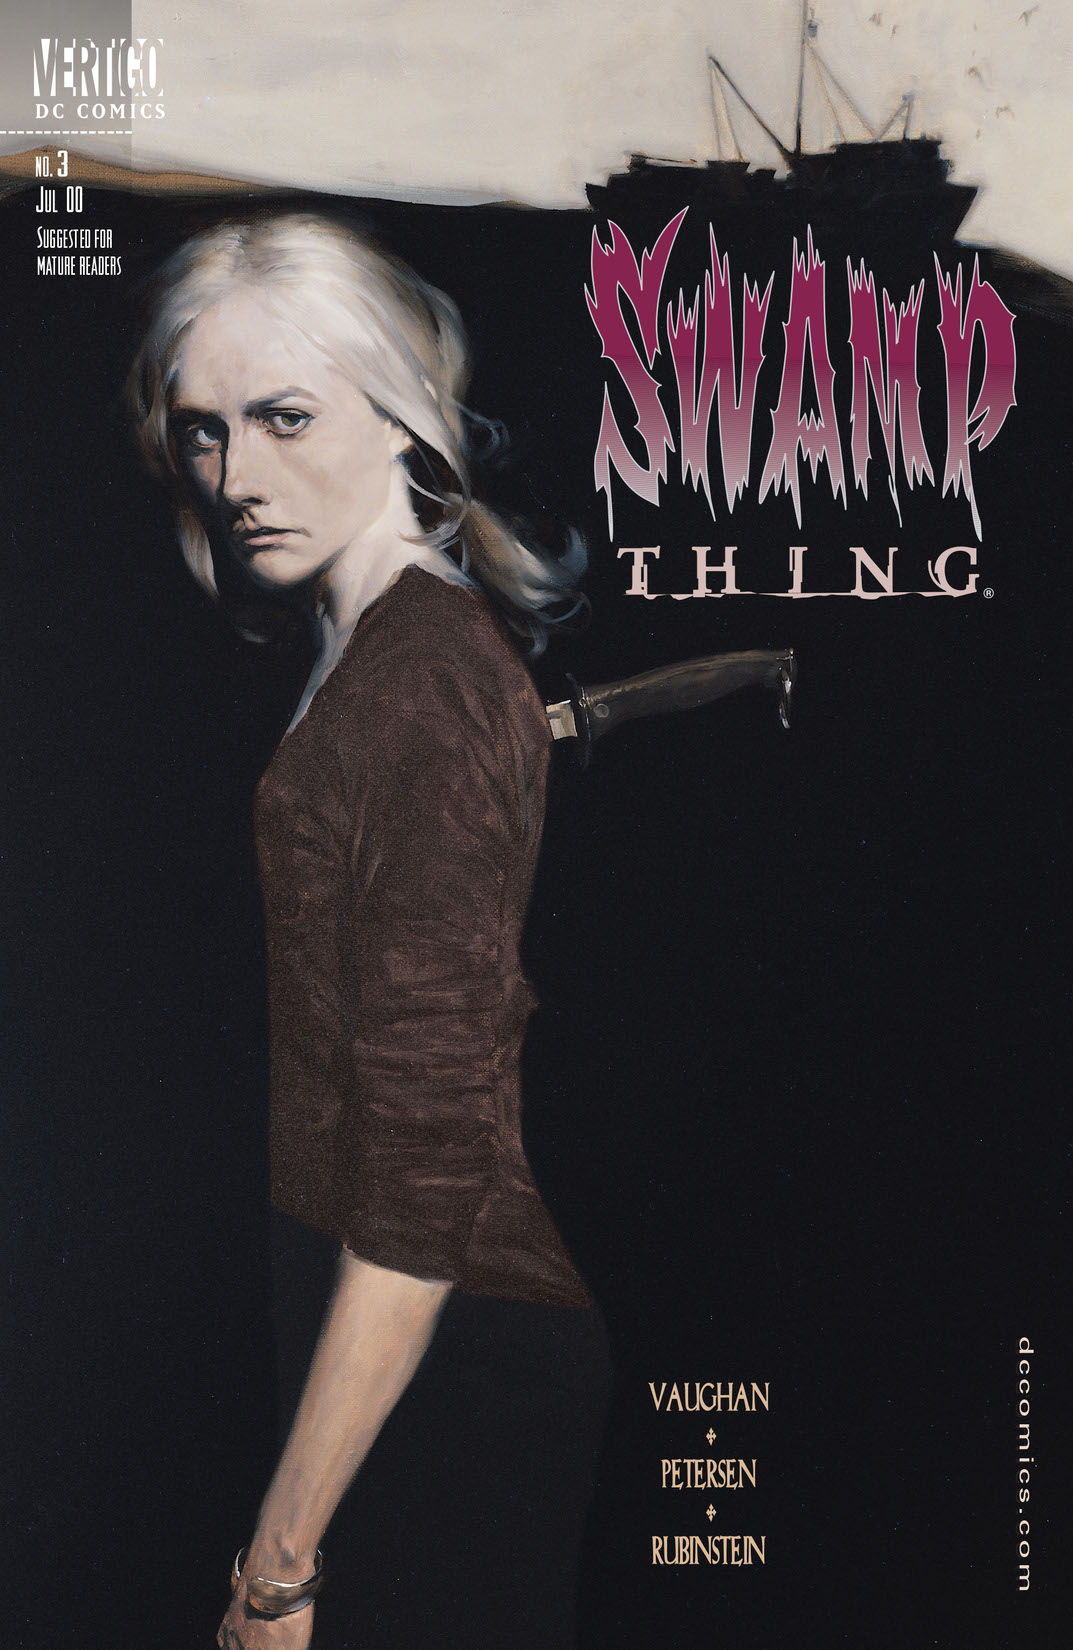 Swamp Thing (2000-) #3 preview images